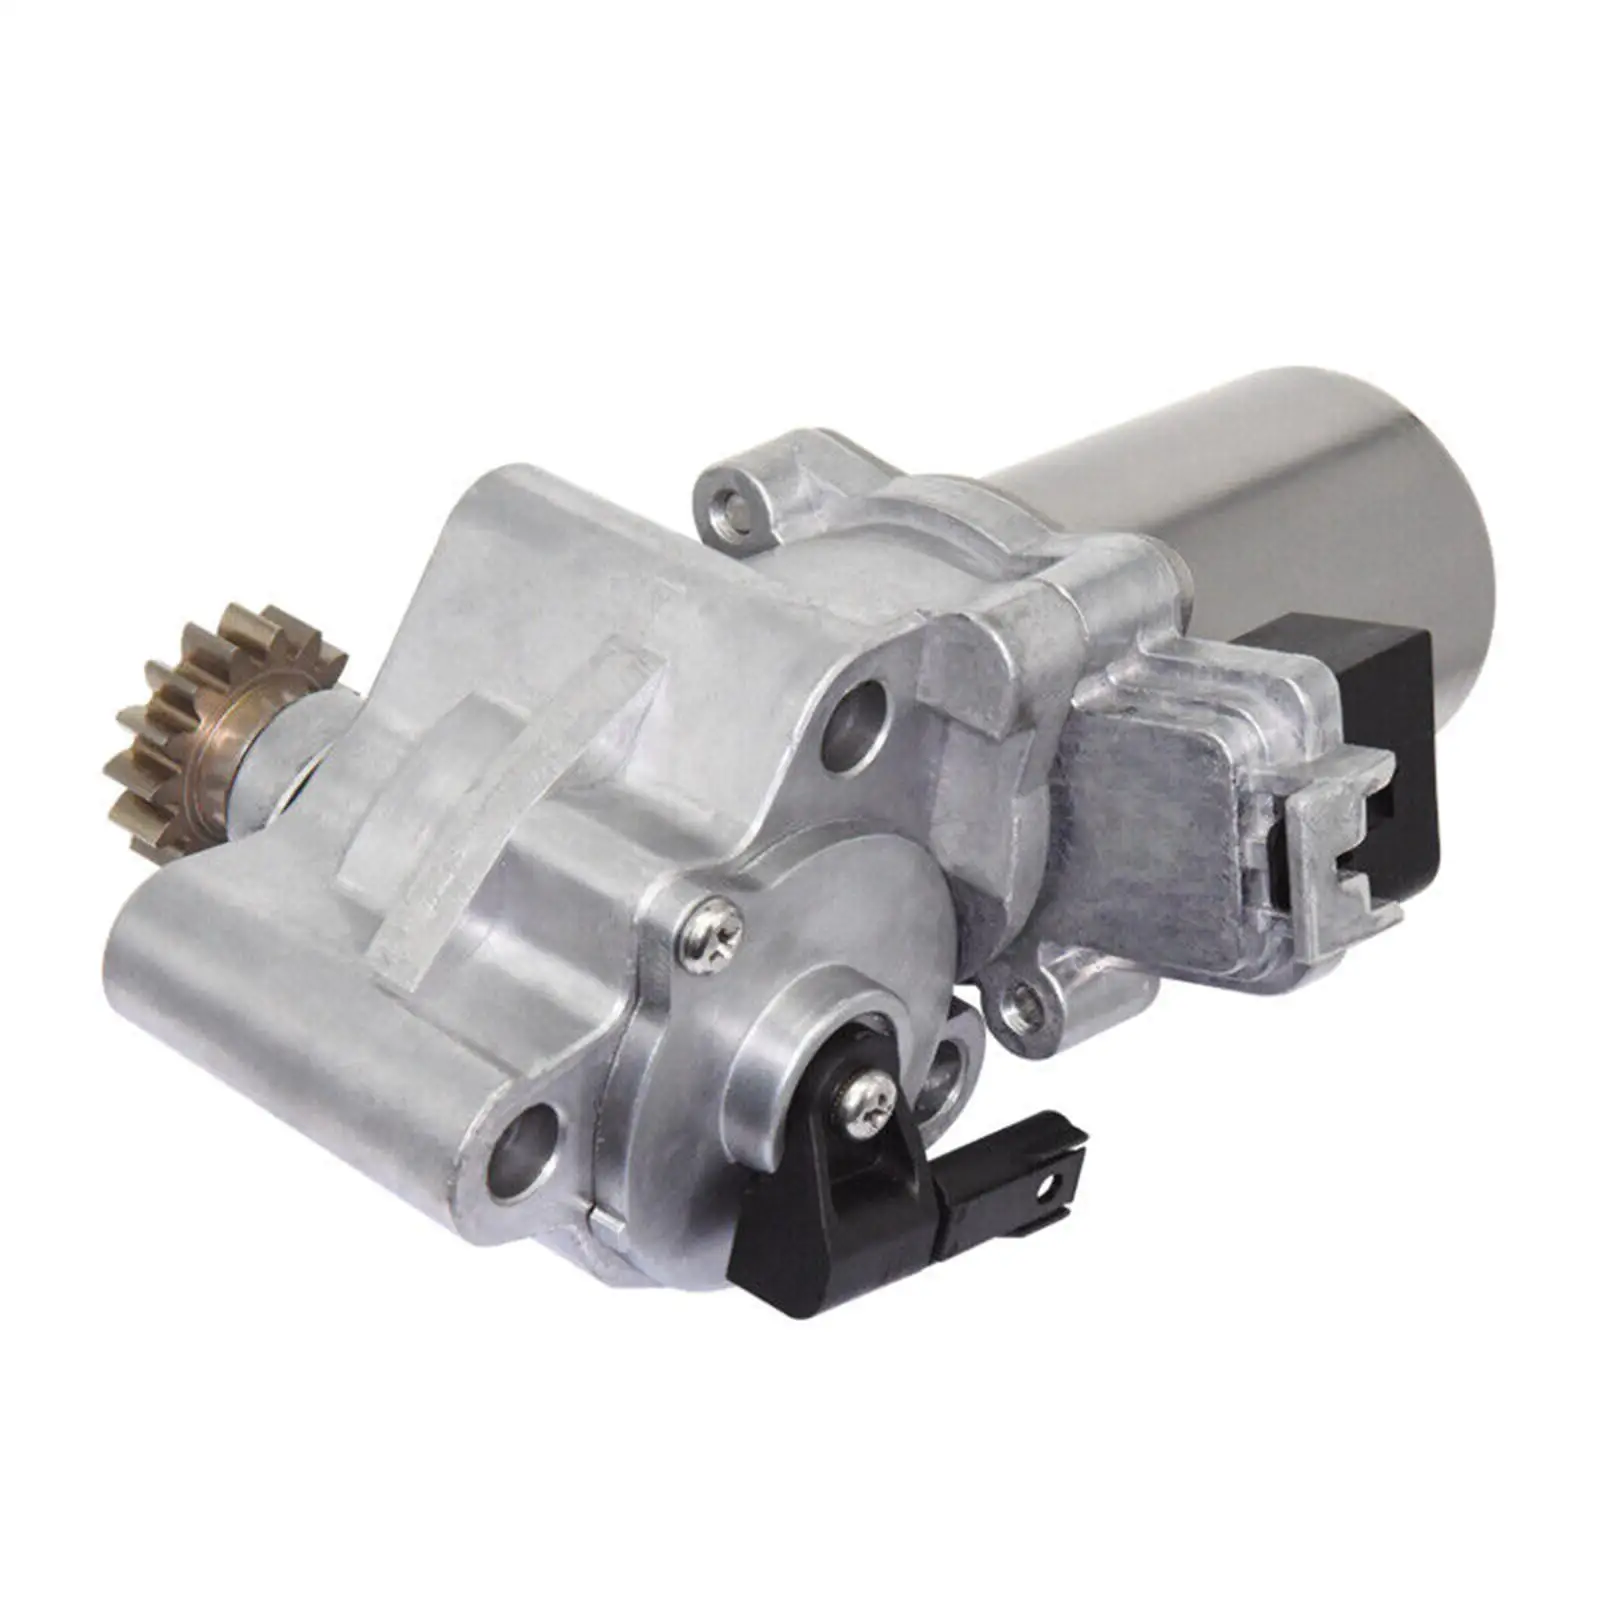 Durable Transfer Case Motor Actuator Easy Installation Automobile for BMW 328i 528i 530Xi 3.0L Direct Replaces Parts Repair